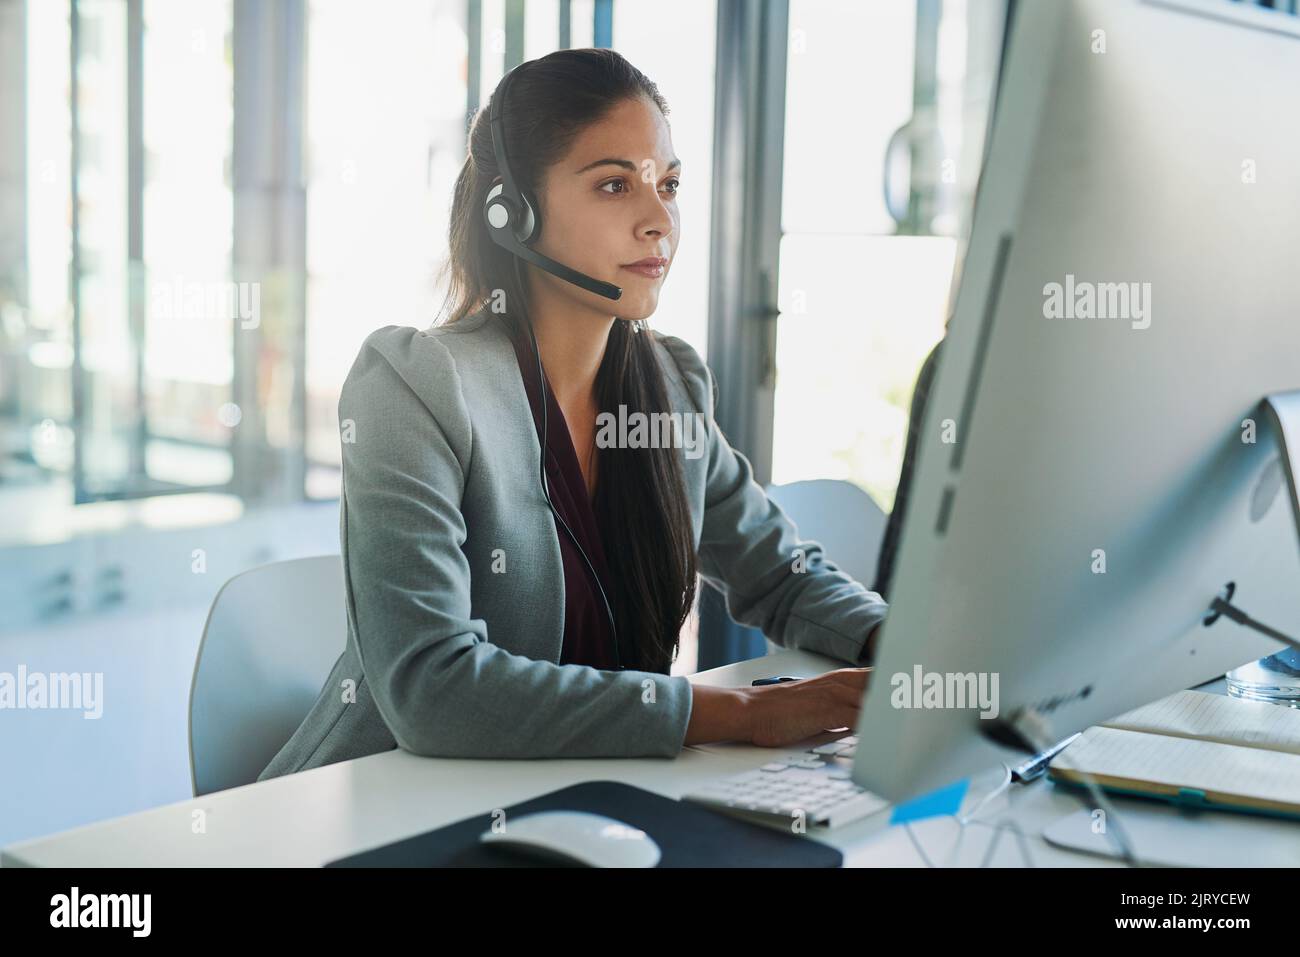 She has a strong client focus. a young woman wearing a headset and using a computer at her work desk. Stock Photo